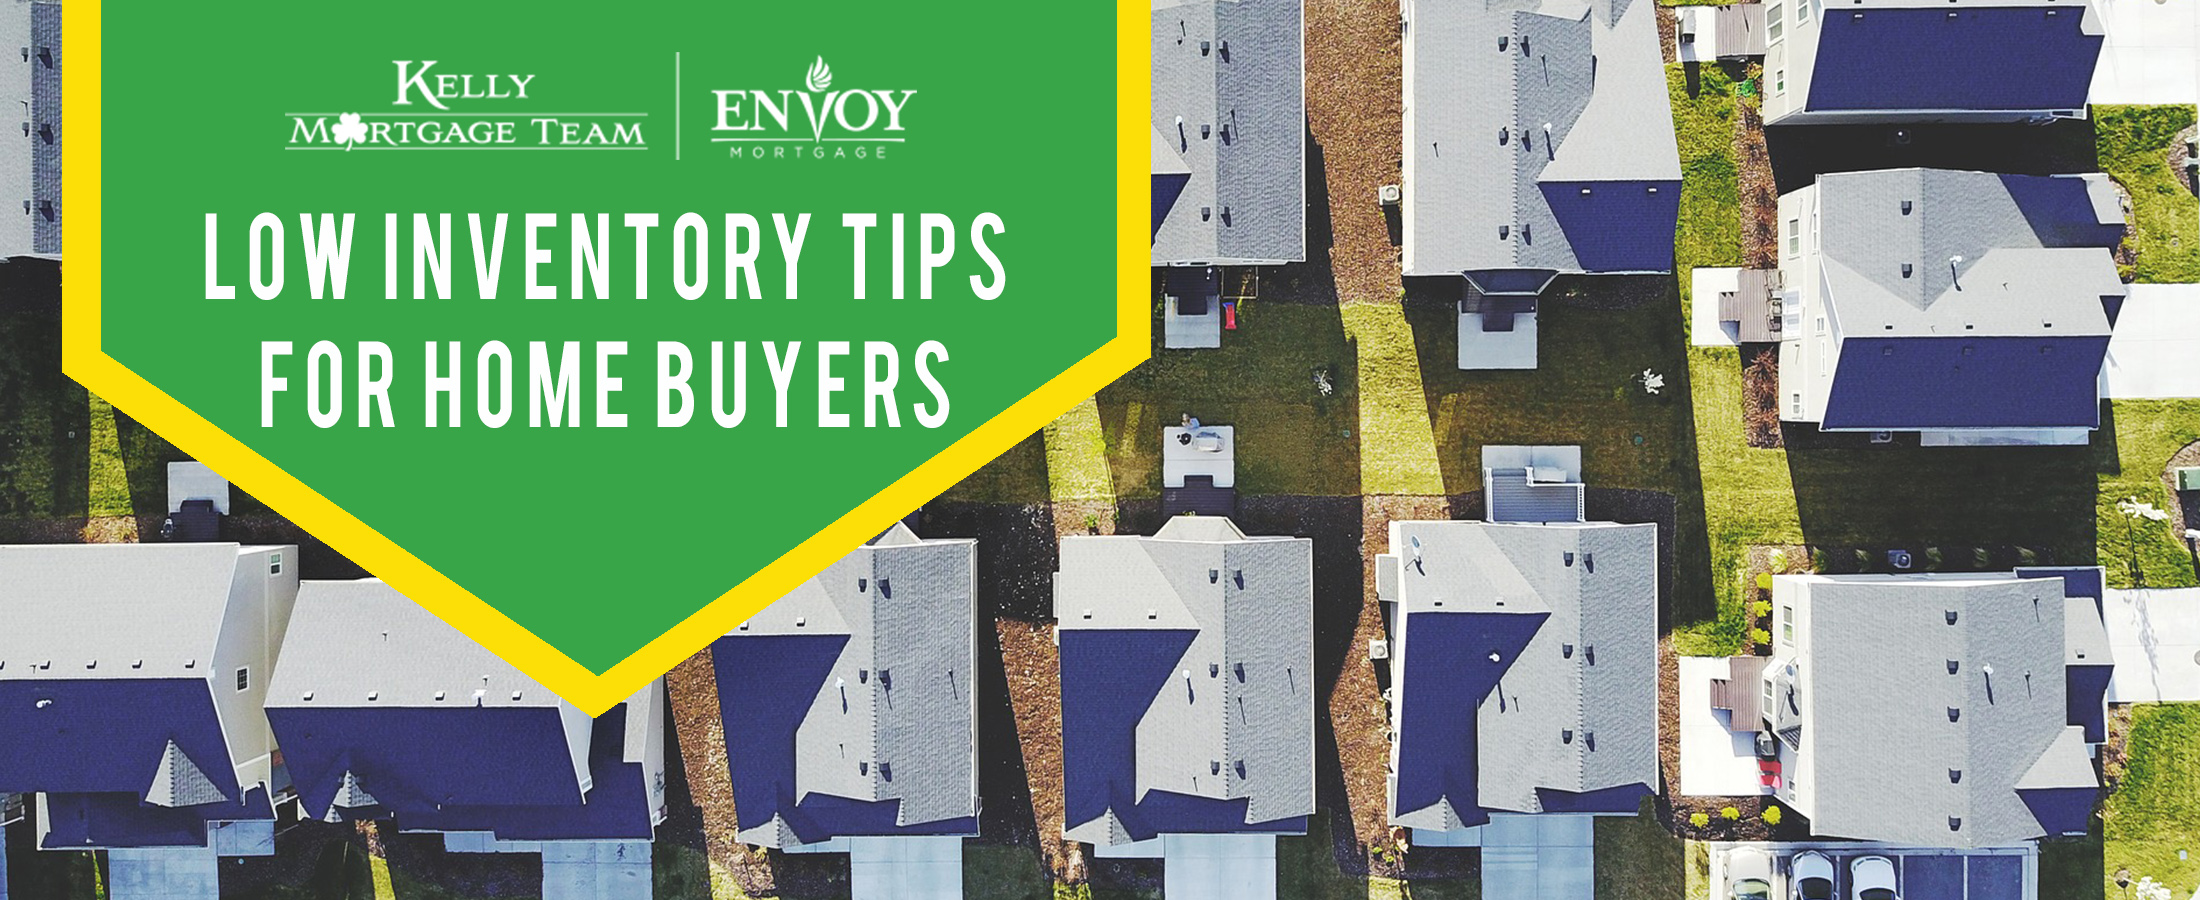 Low Inventory Tips for Home Buyers